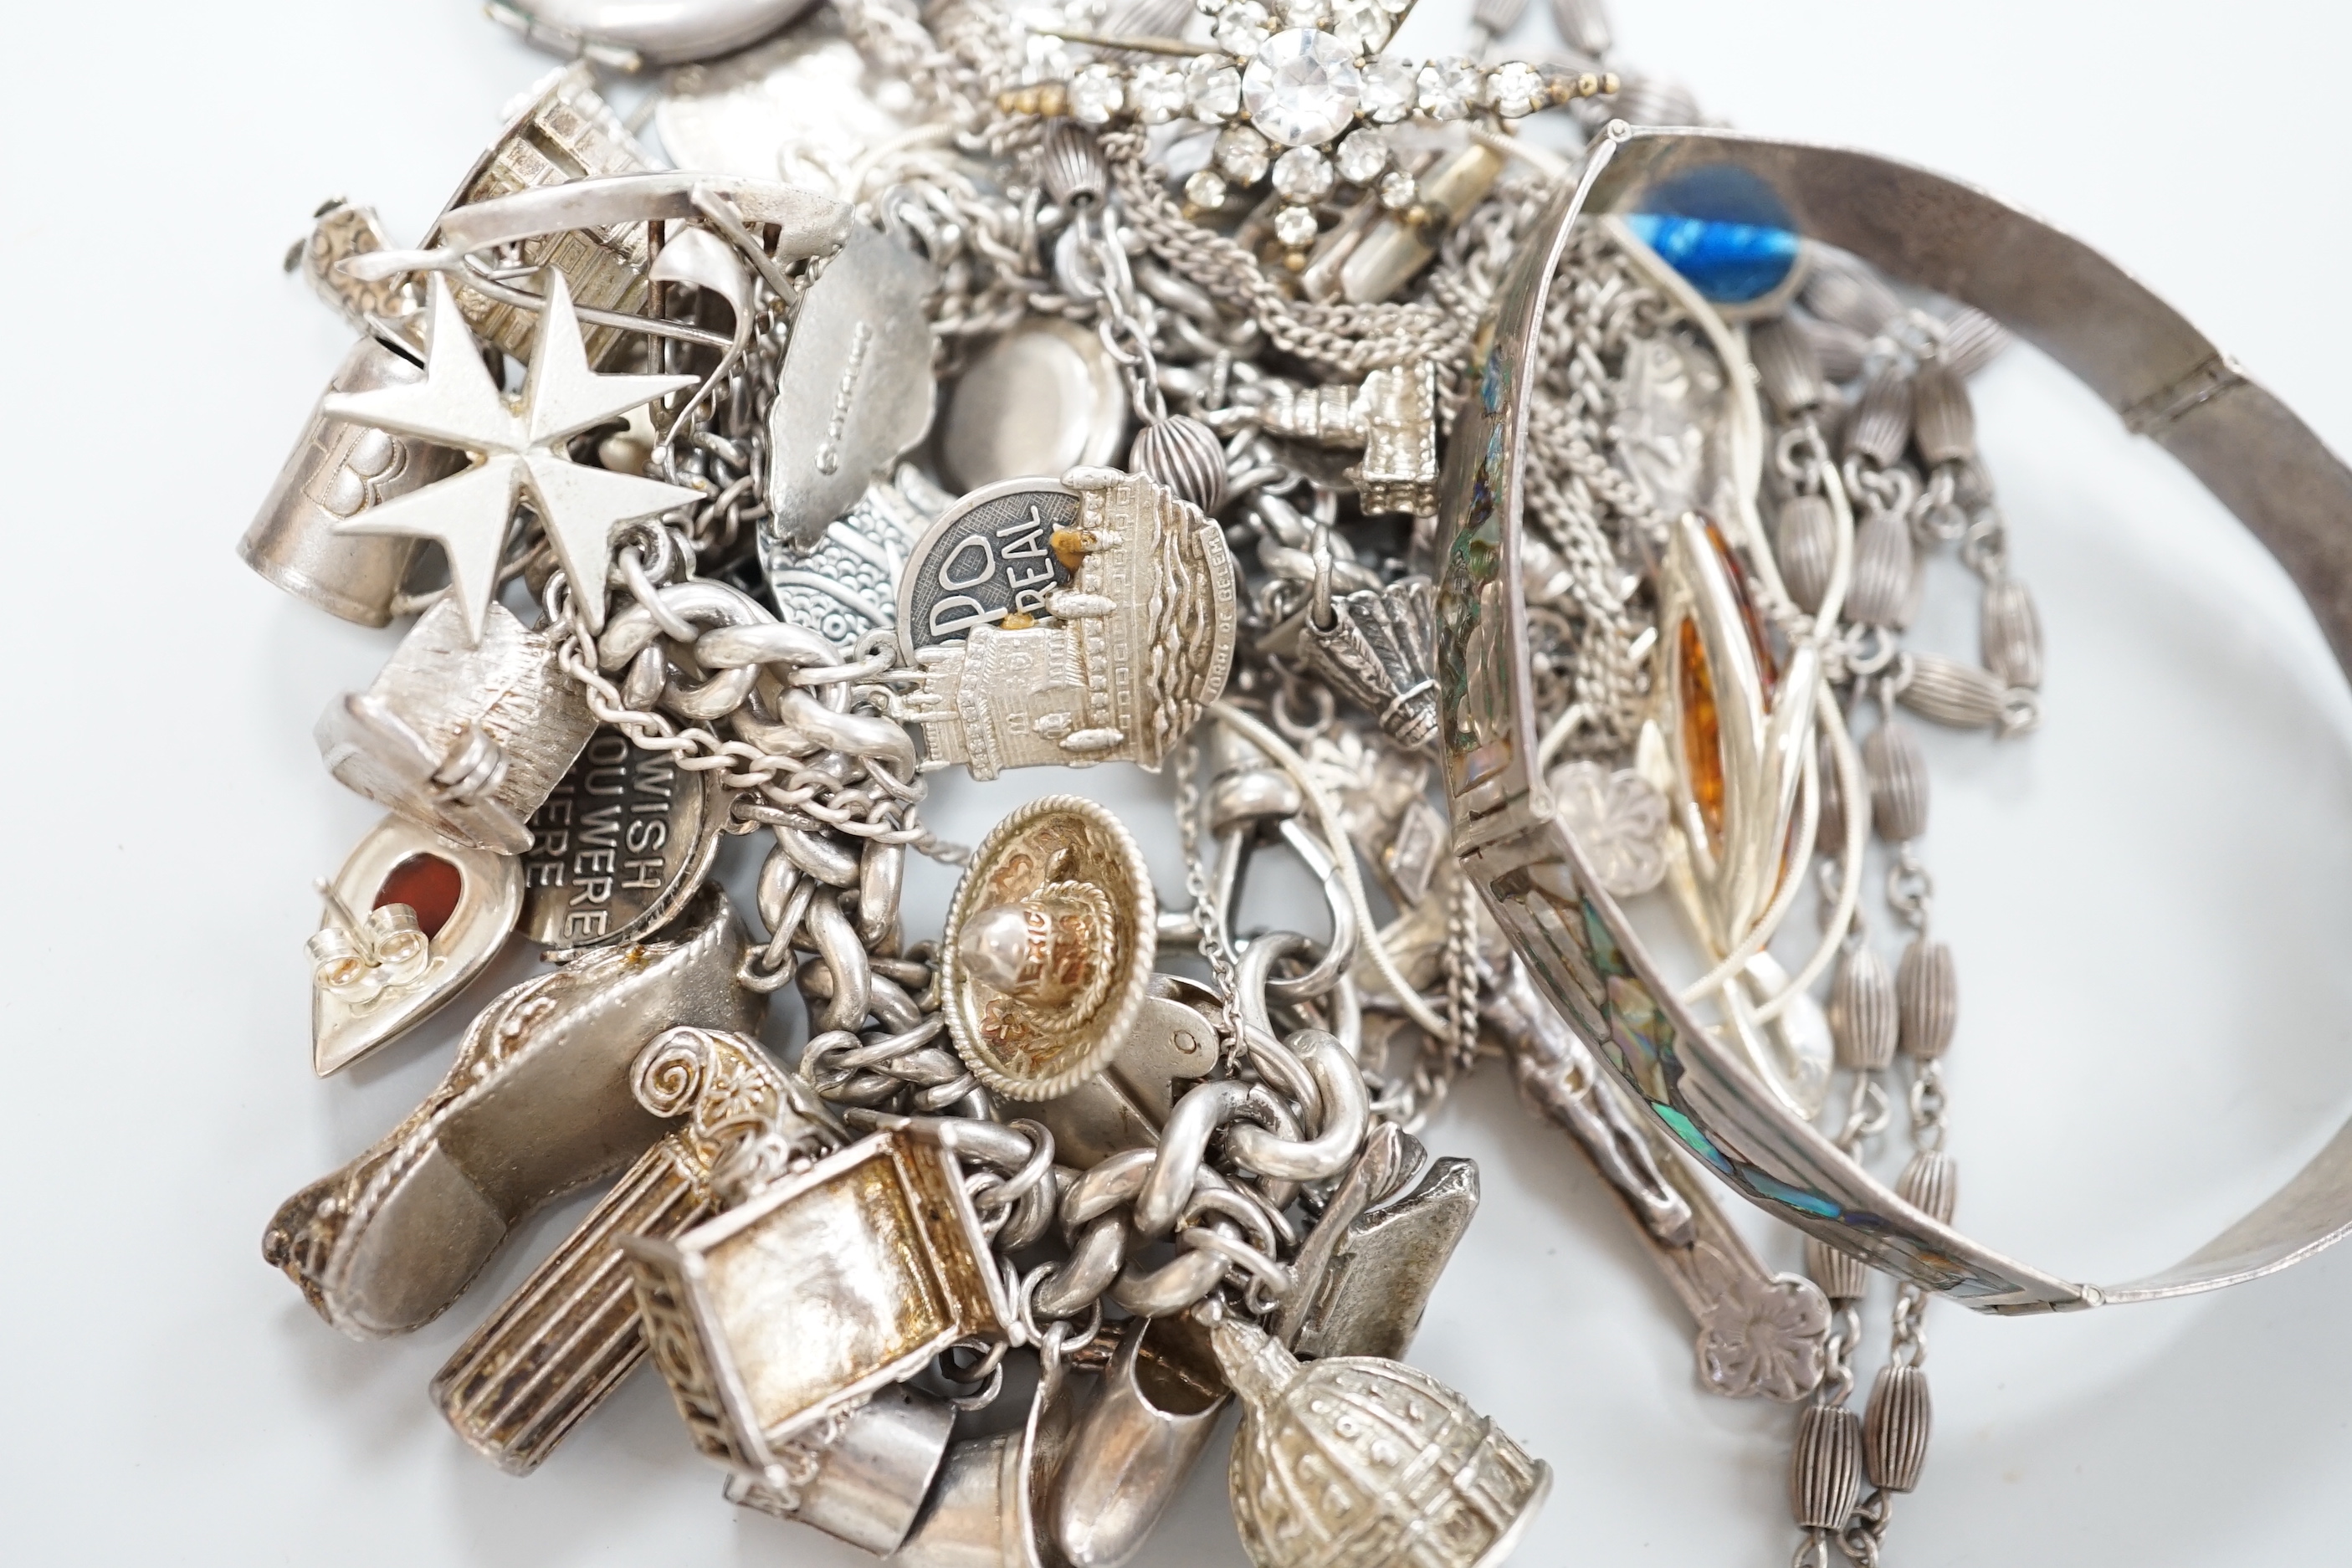 A silver charm bracelet and a small quantity of other silver and white metal jewellery.